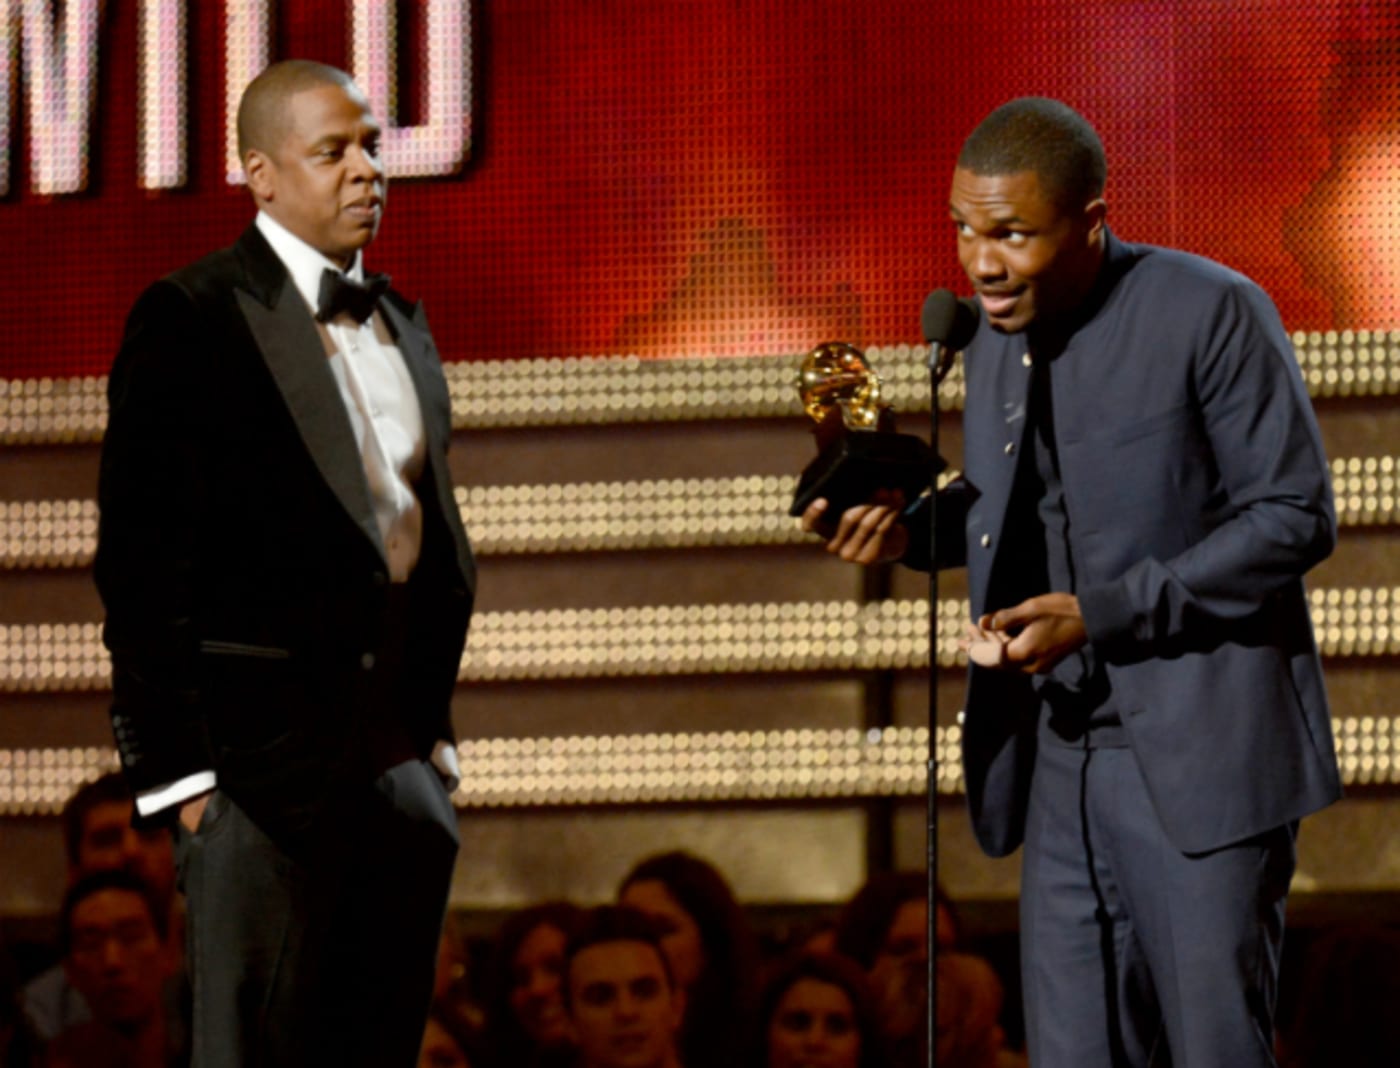 Jay Z and Frank Ocean at the 55th Grammy Awards